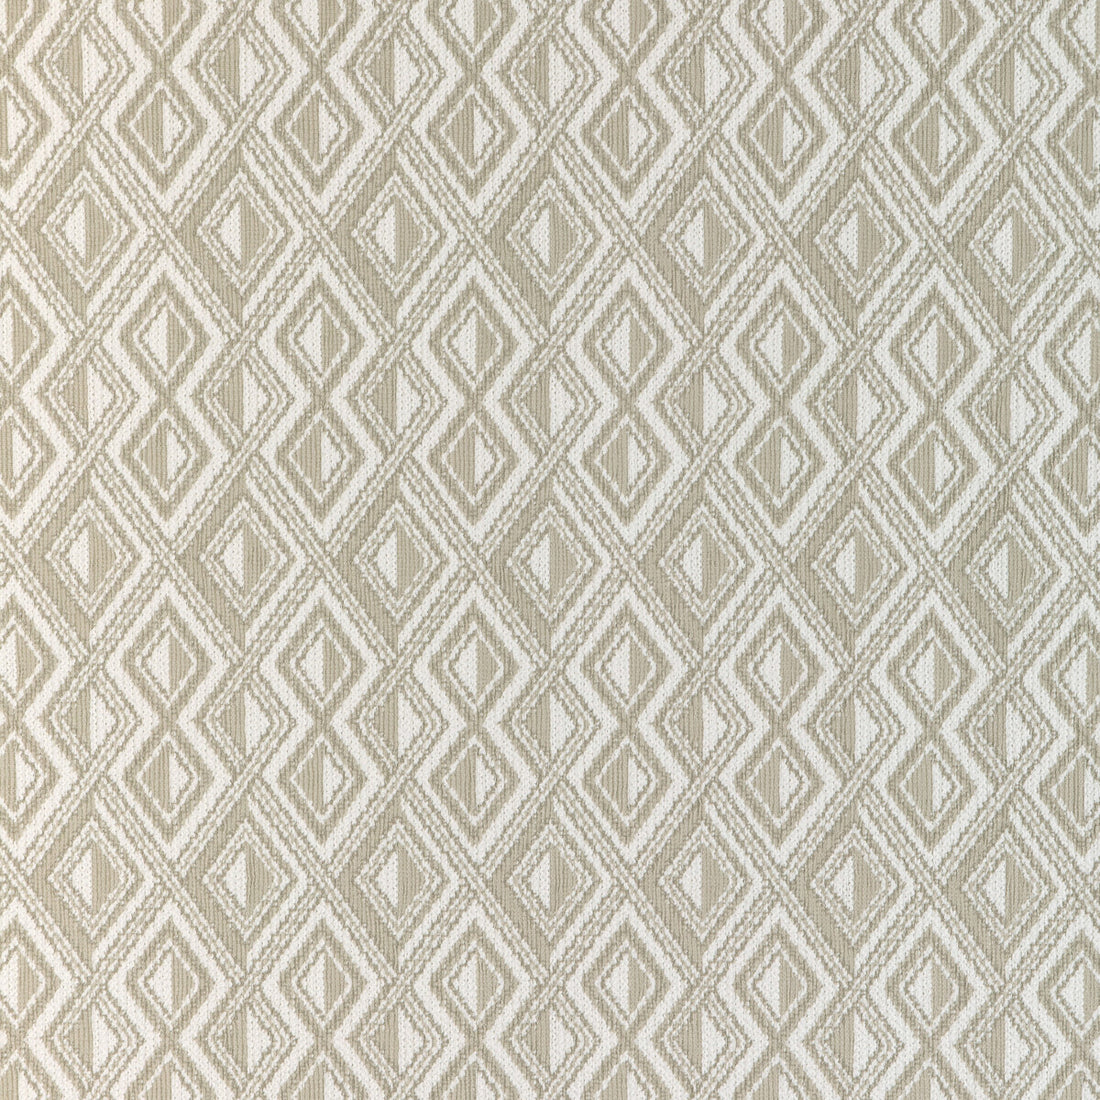 Rough Cut fabric in taupe color - pattern 37058.106.0 - by Kravet Design in the Thom Filicia Latitude collection